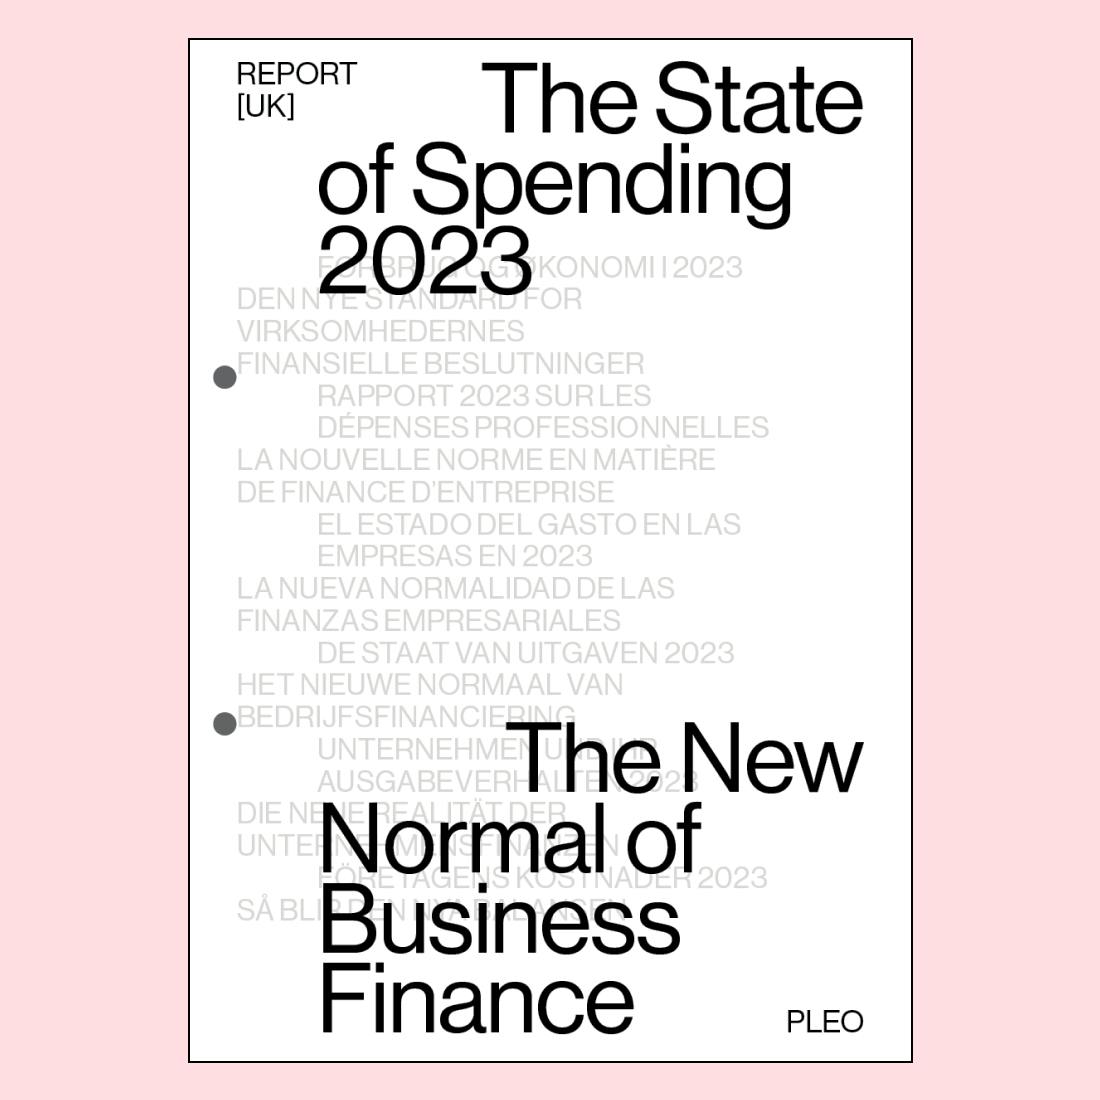 Cover of the State of Spending report